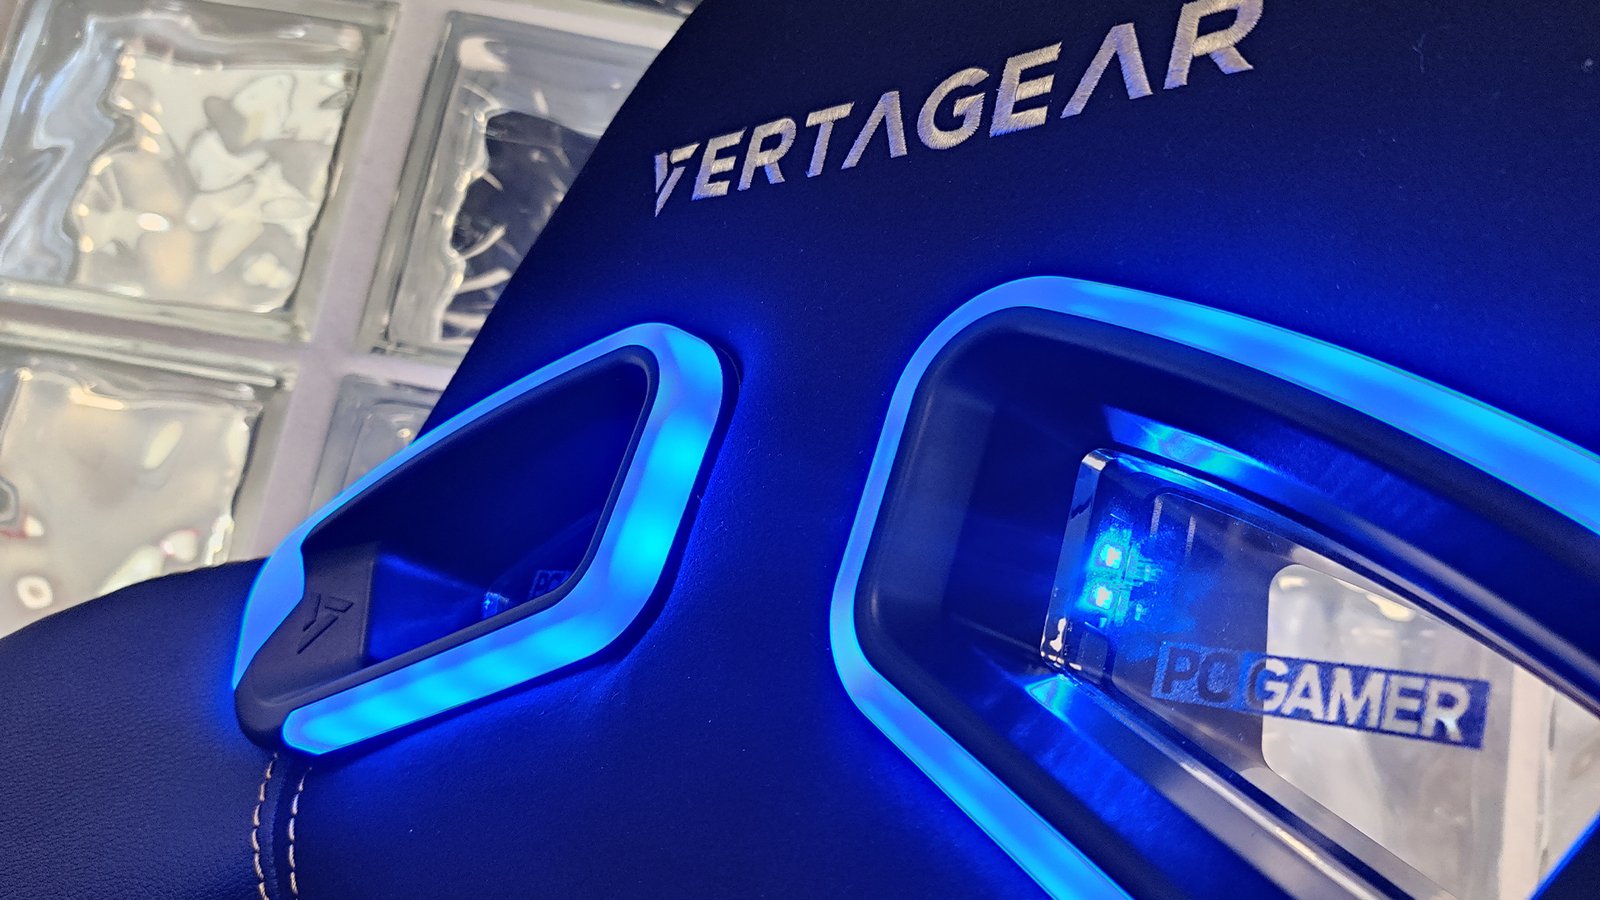 The Vertagear SL5000 with RGB LED kit installed.